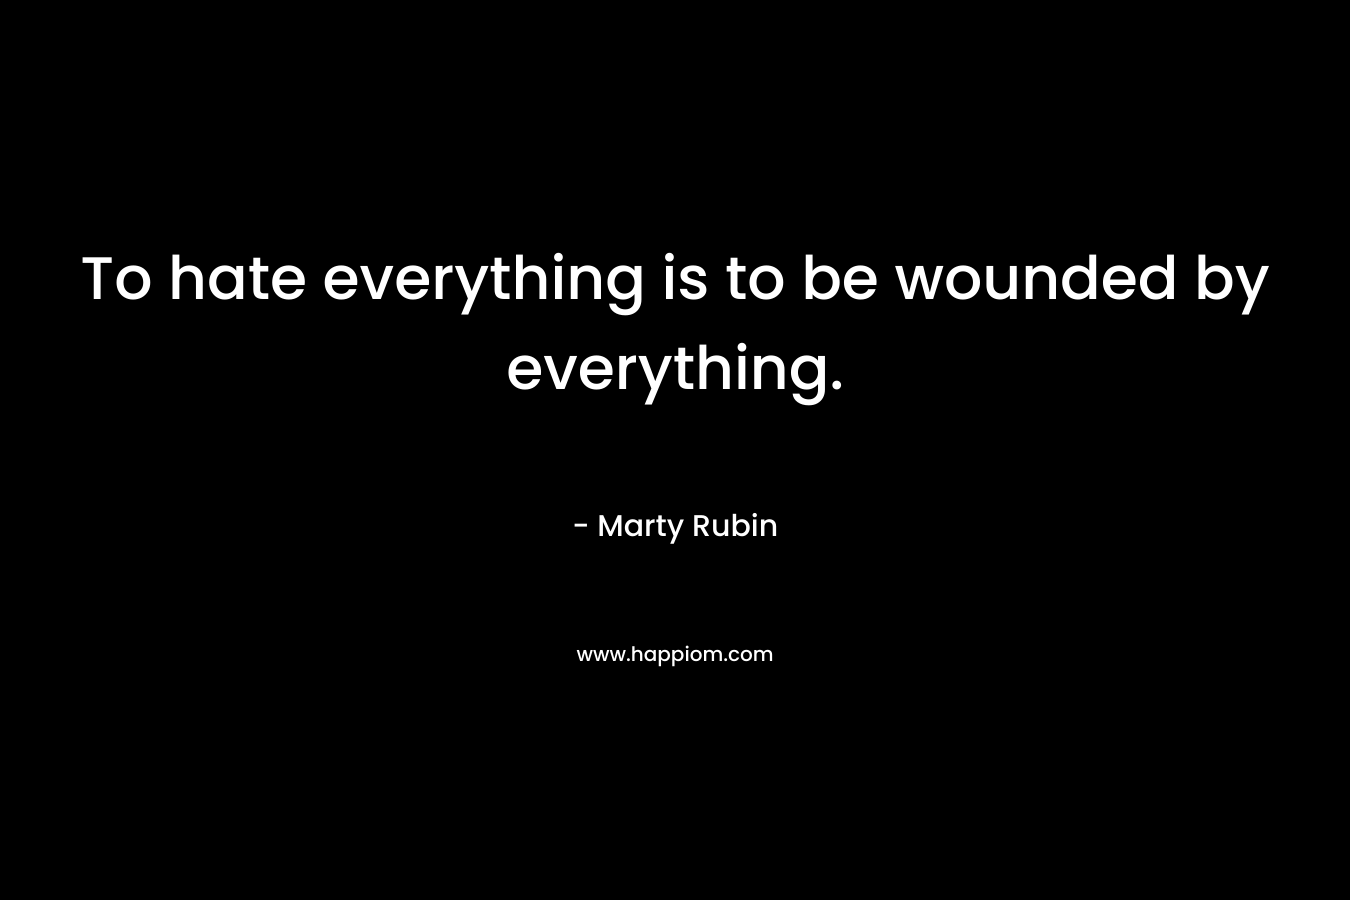 To hate everything is to be wounded by everything.